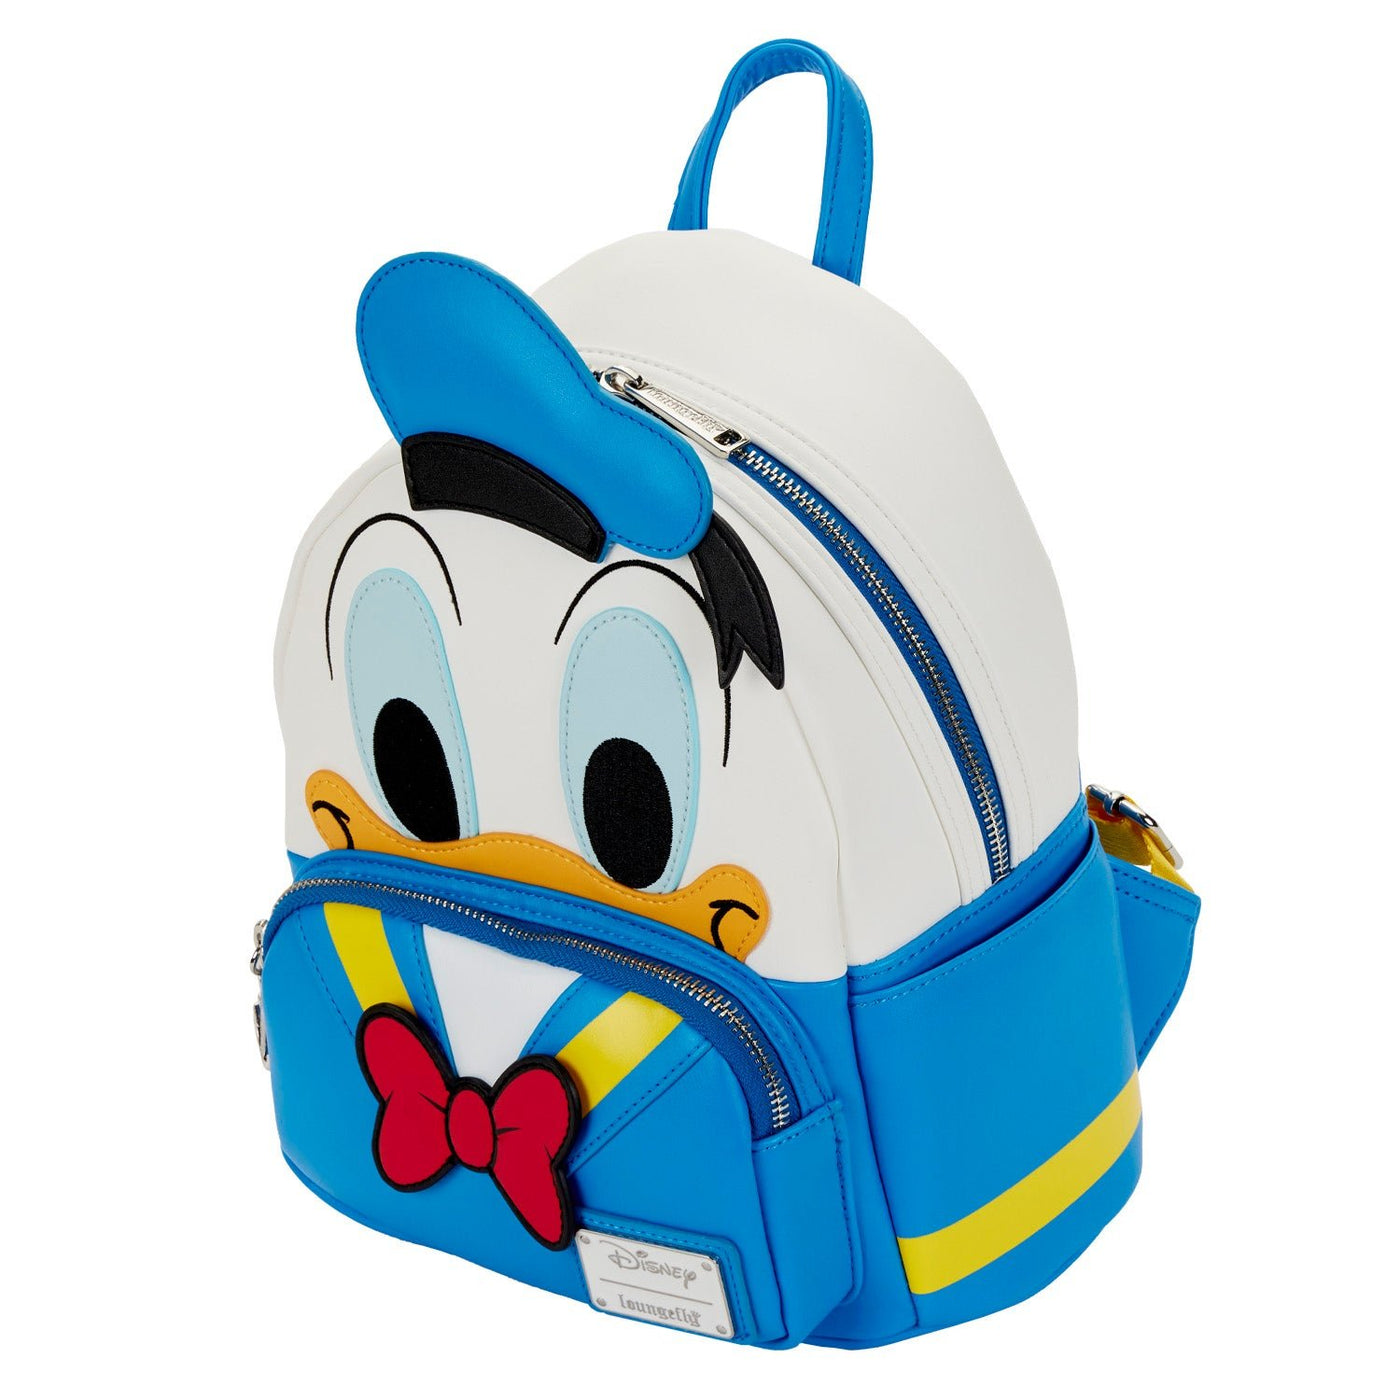 Loungefly Disney Donald Duck Cosplay Mini Backpack - Top View